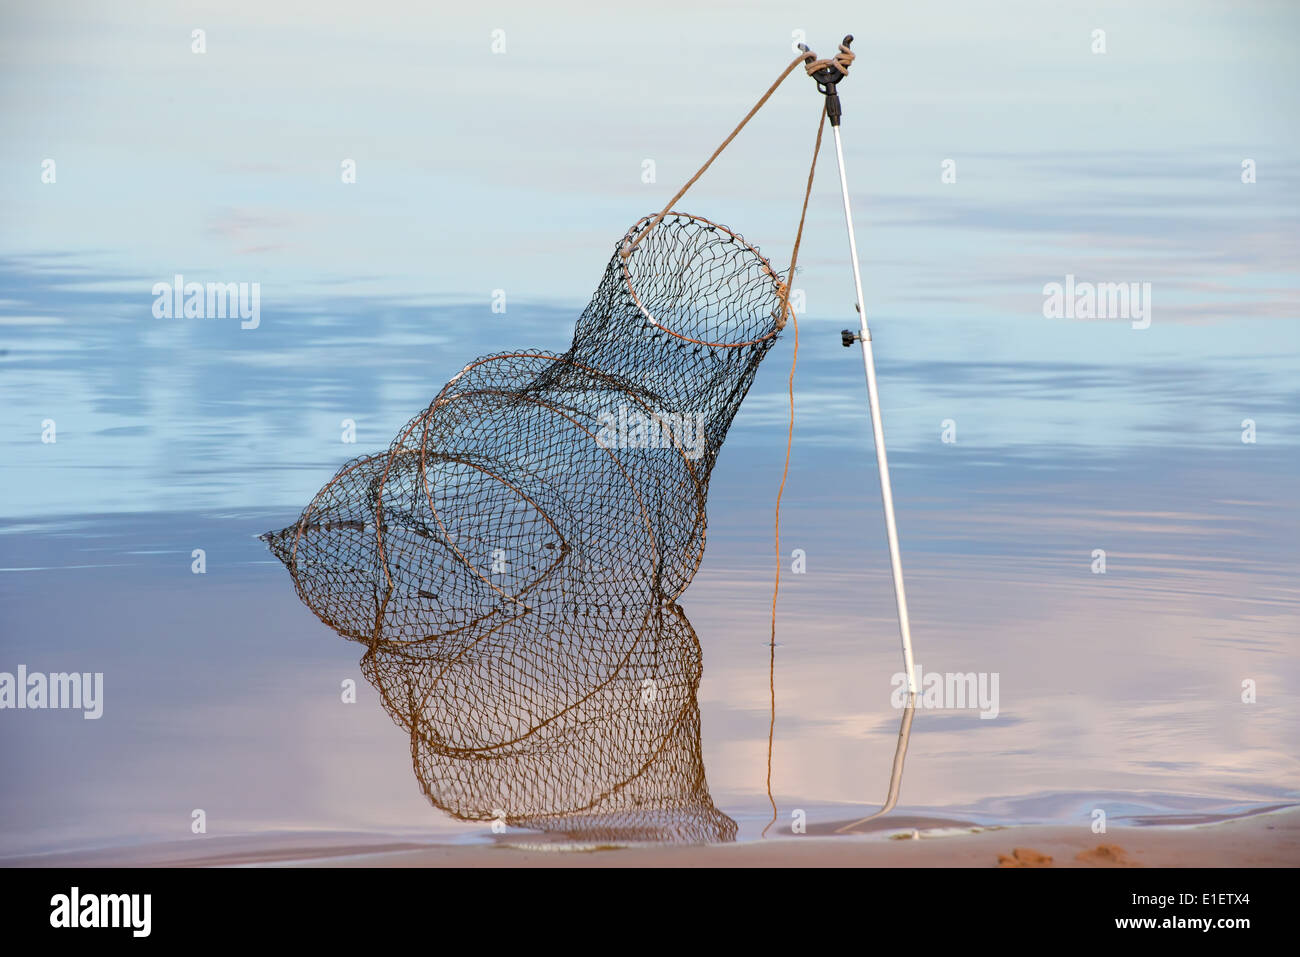 Basket for storage cage fish caught in water Stock Photo - Alamy